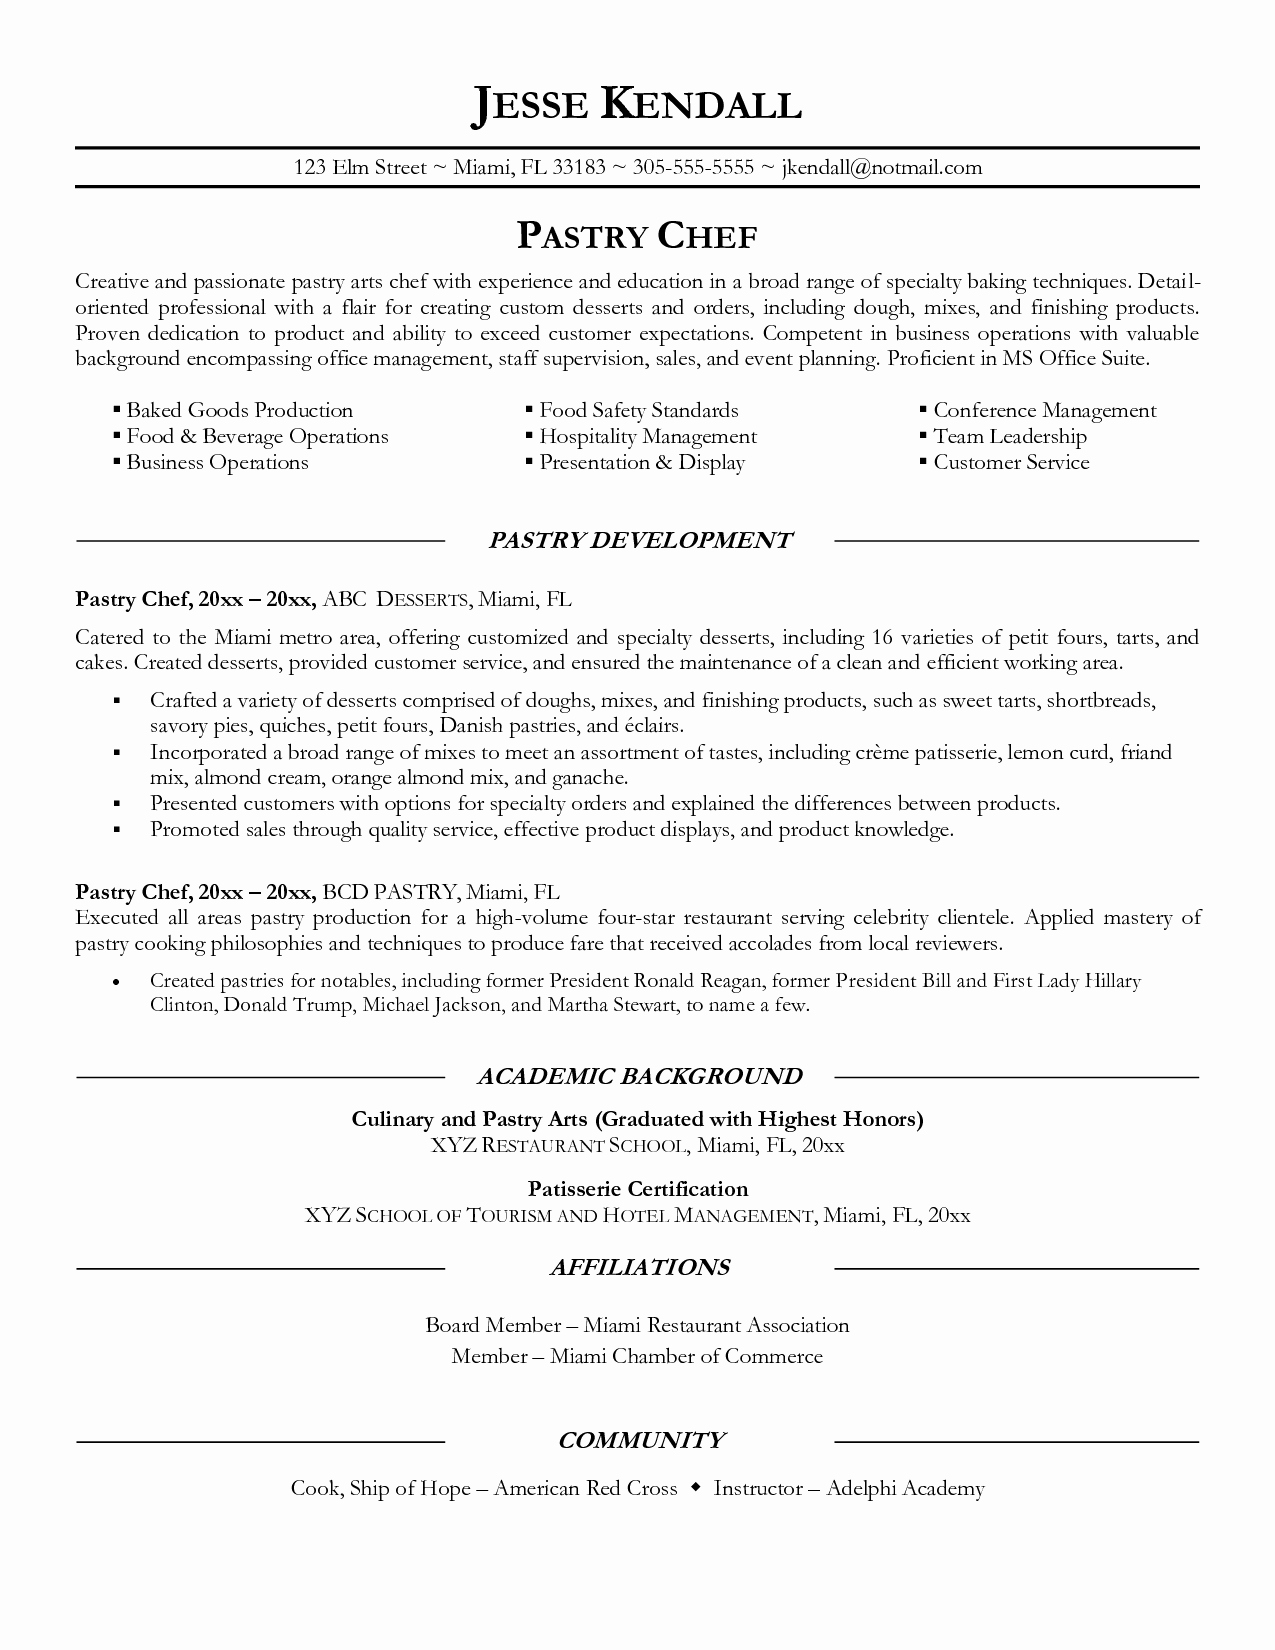 Resume for A Chef Beautiful Pastry Chef Resume Sample Mohd Ahmed